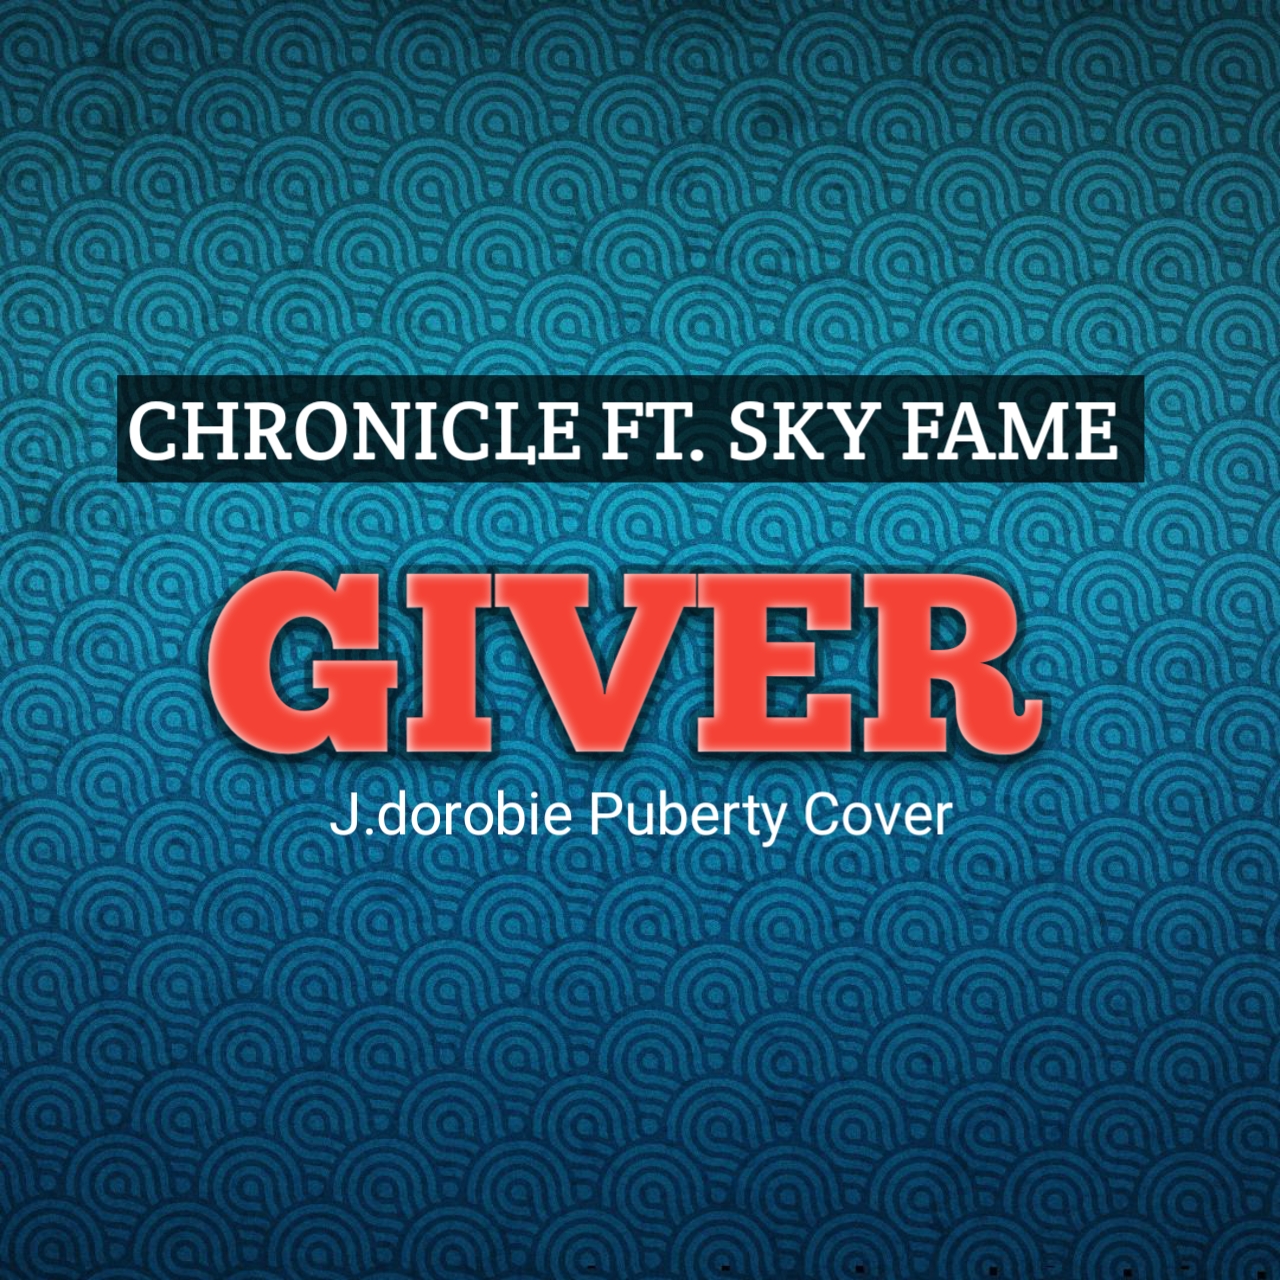 Chronicle_&amp;_Sky_Fame-giver cover